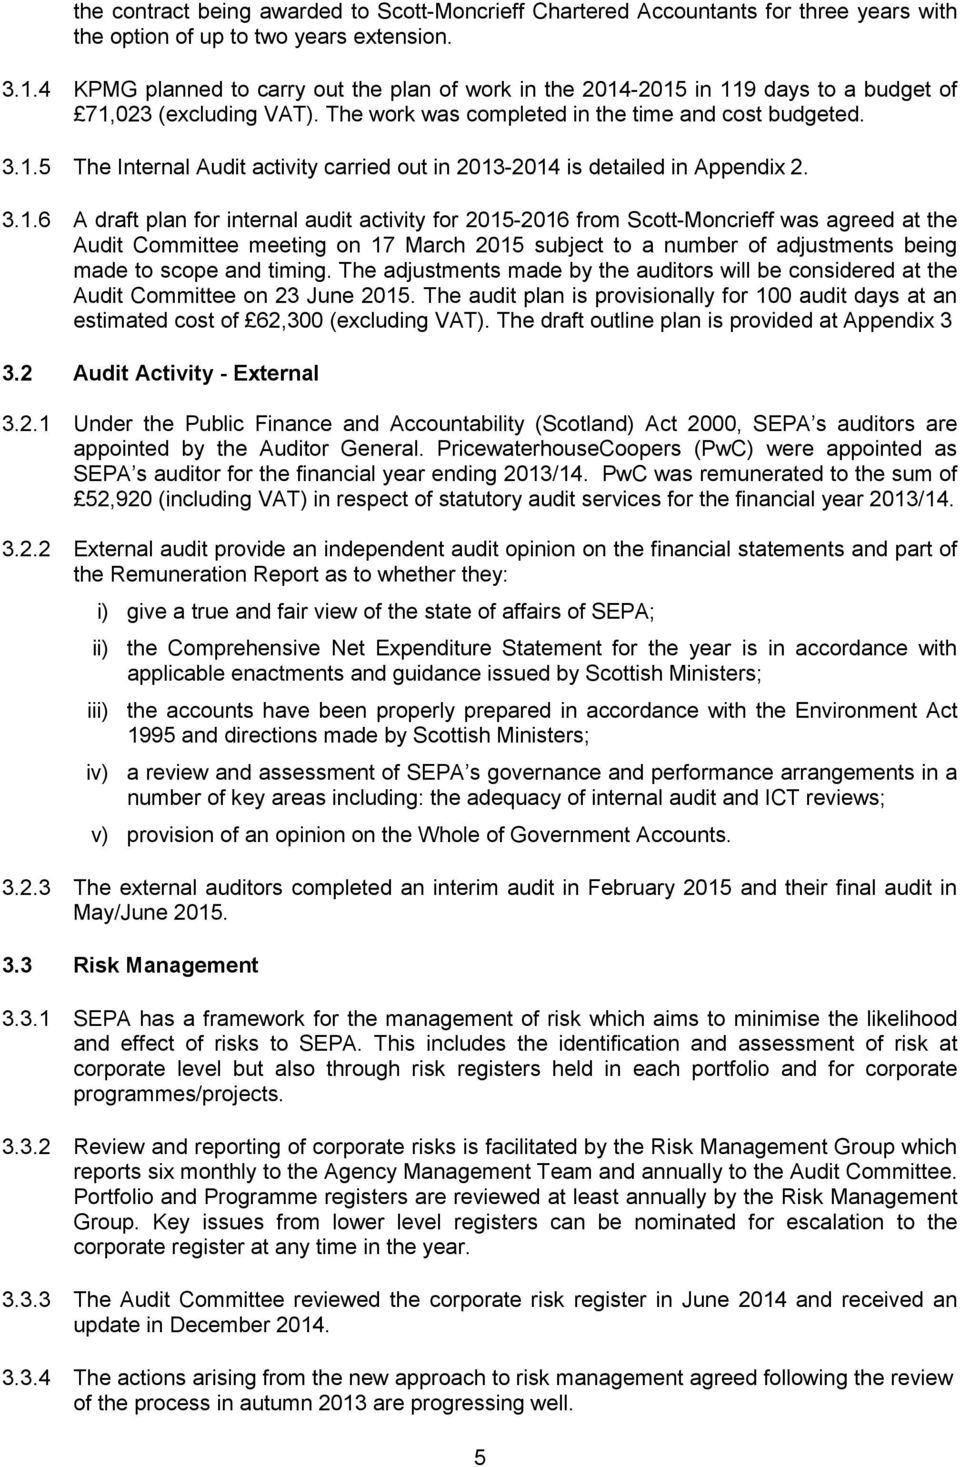 3.1.6 A draft plan for internal audit activity for 2015-2016 from Scott-Moncrieff was agreed at the Audit Committee meeting on 17 March 2015 subject to a number of adjustments being made to scope and